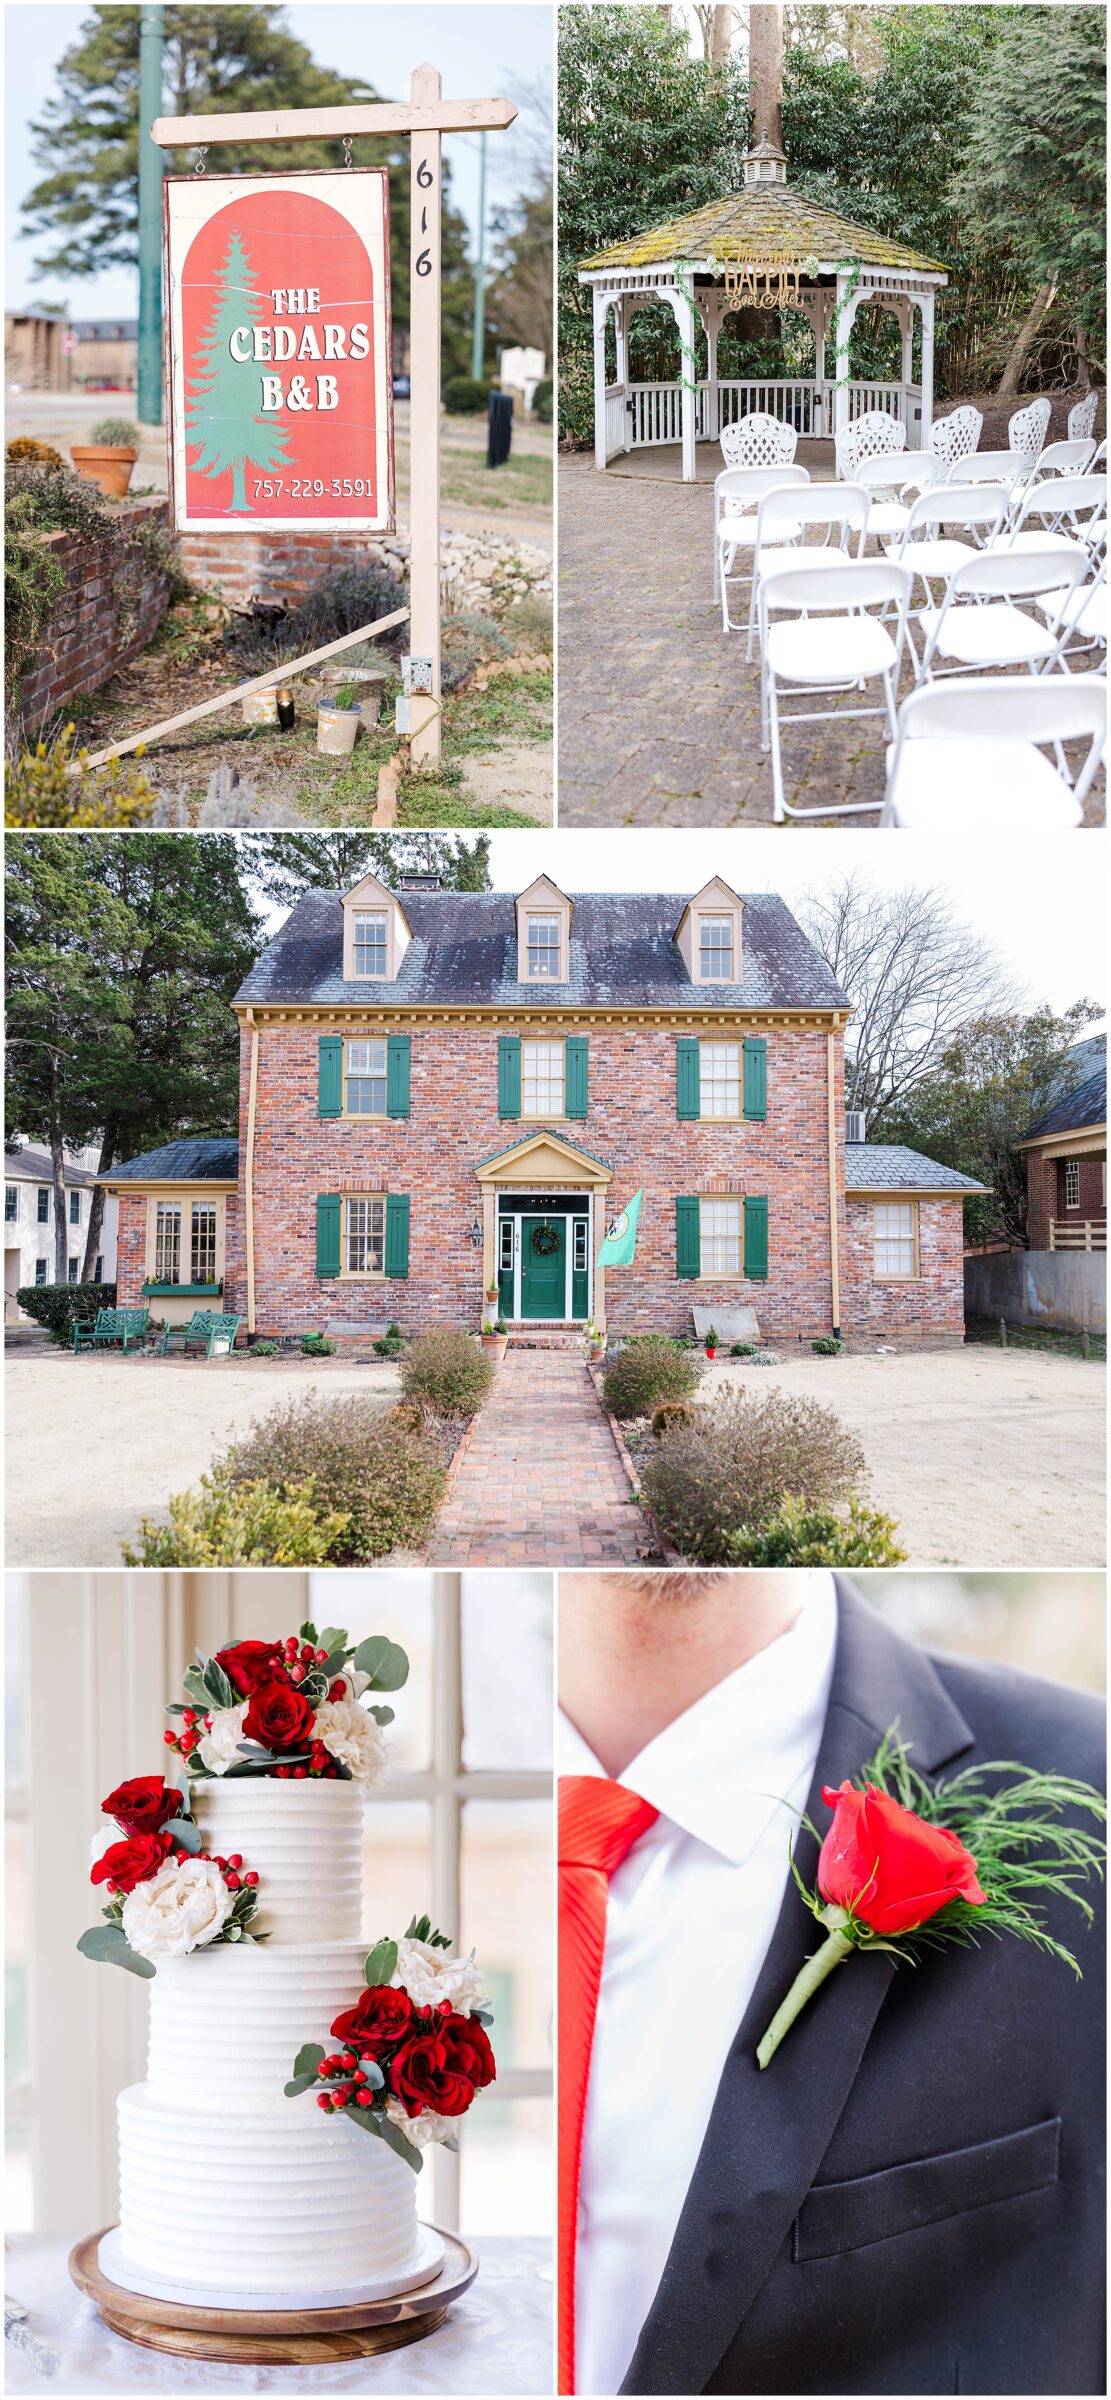 The Cedars of Williamsburg Bed & Breakfast wedding venue is the perfect choice for your intimate elopement!